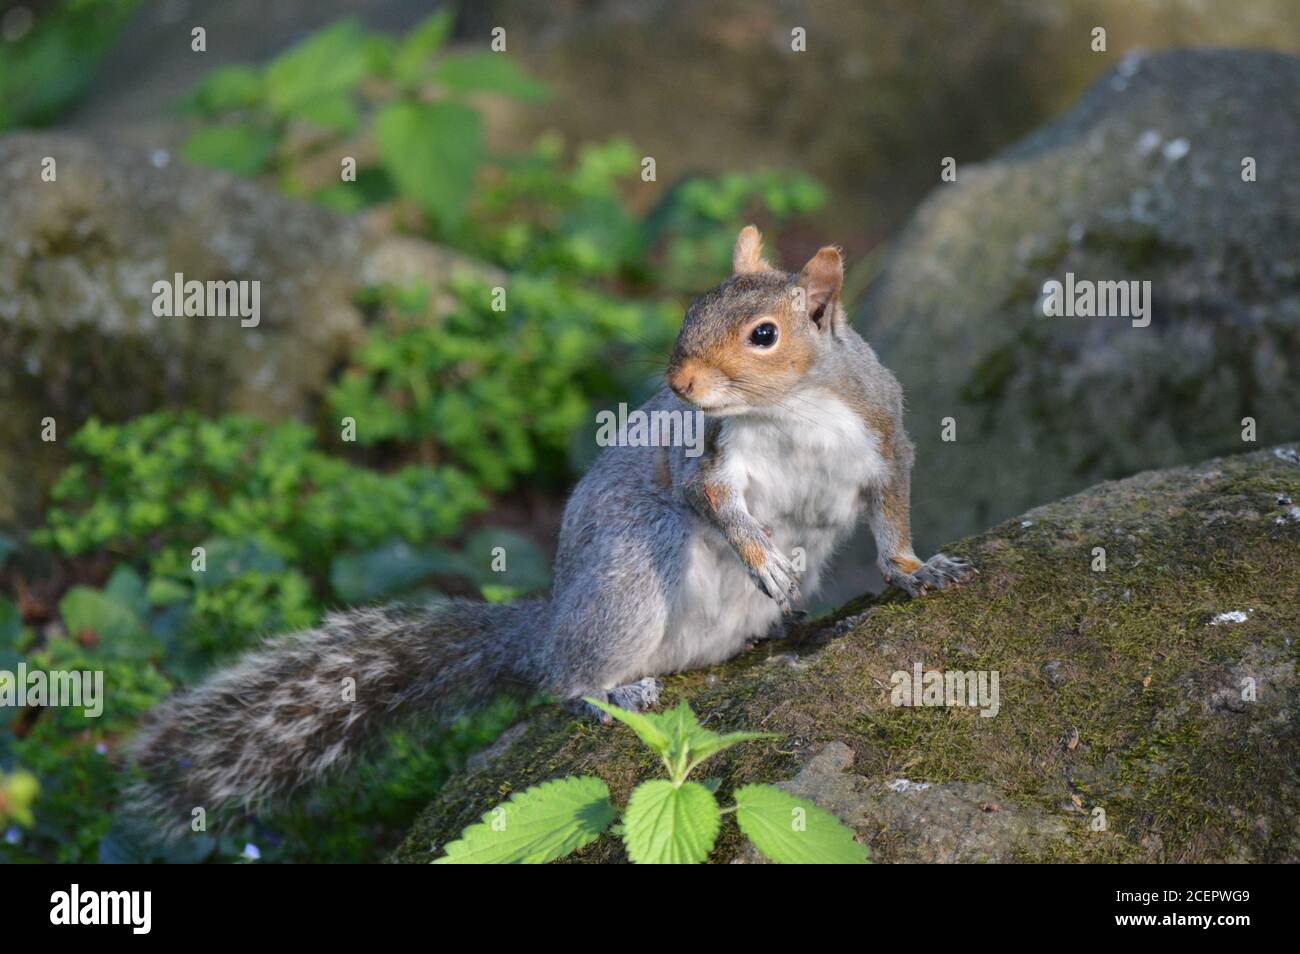 squirrel on nature Stock Photo